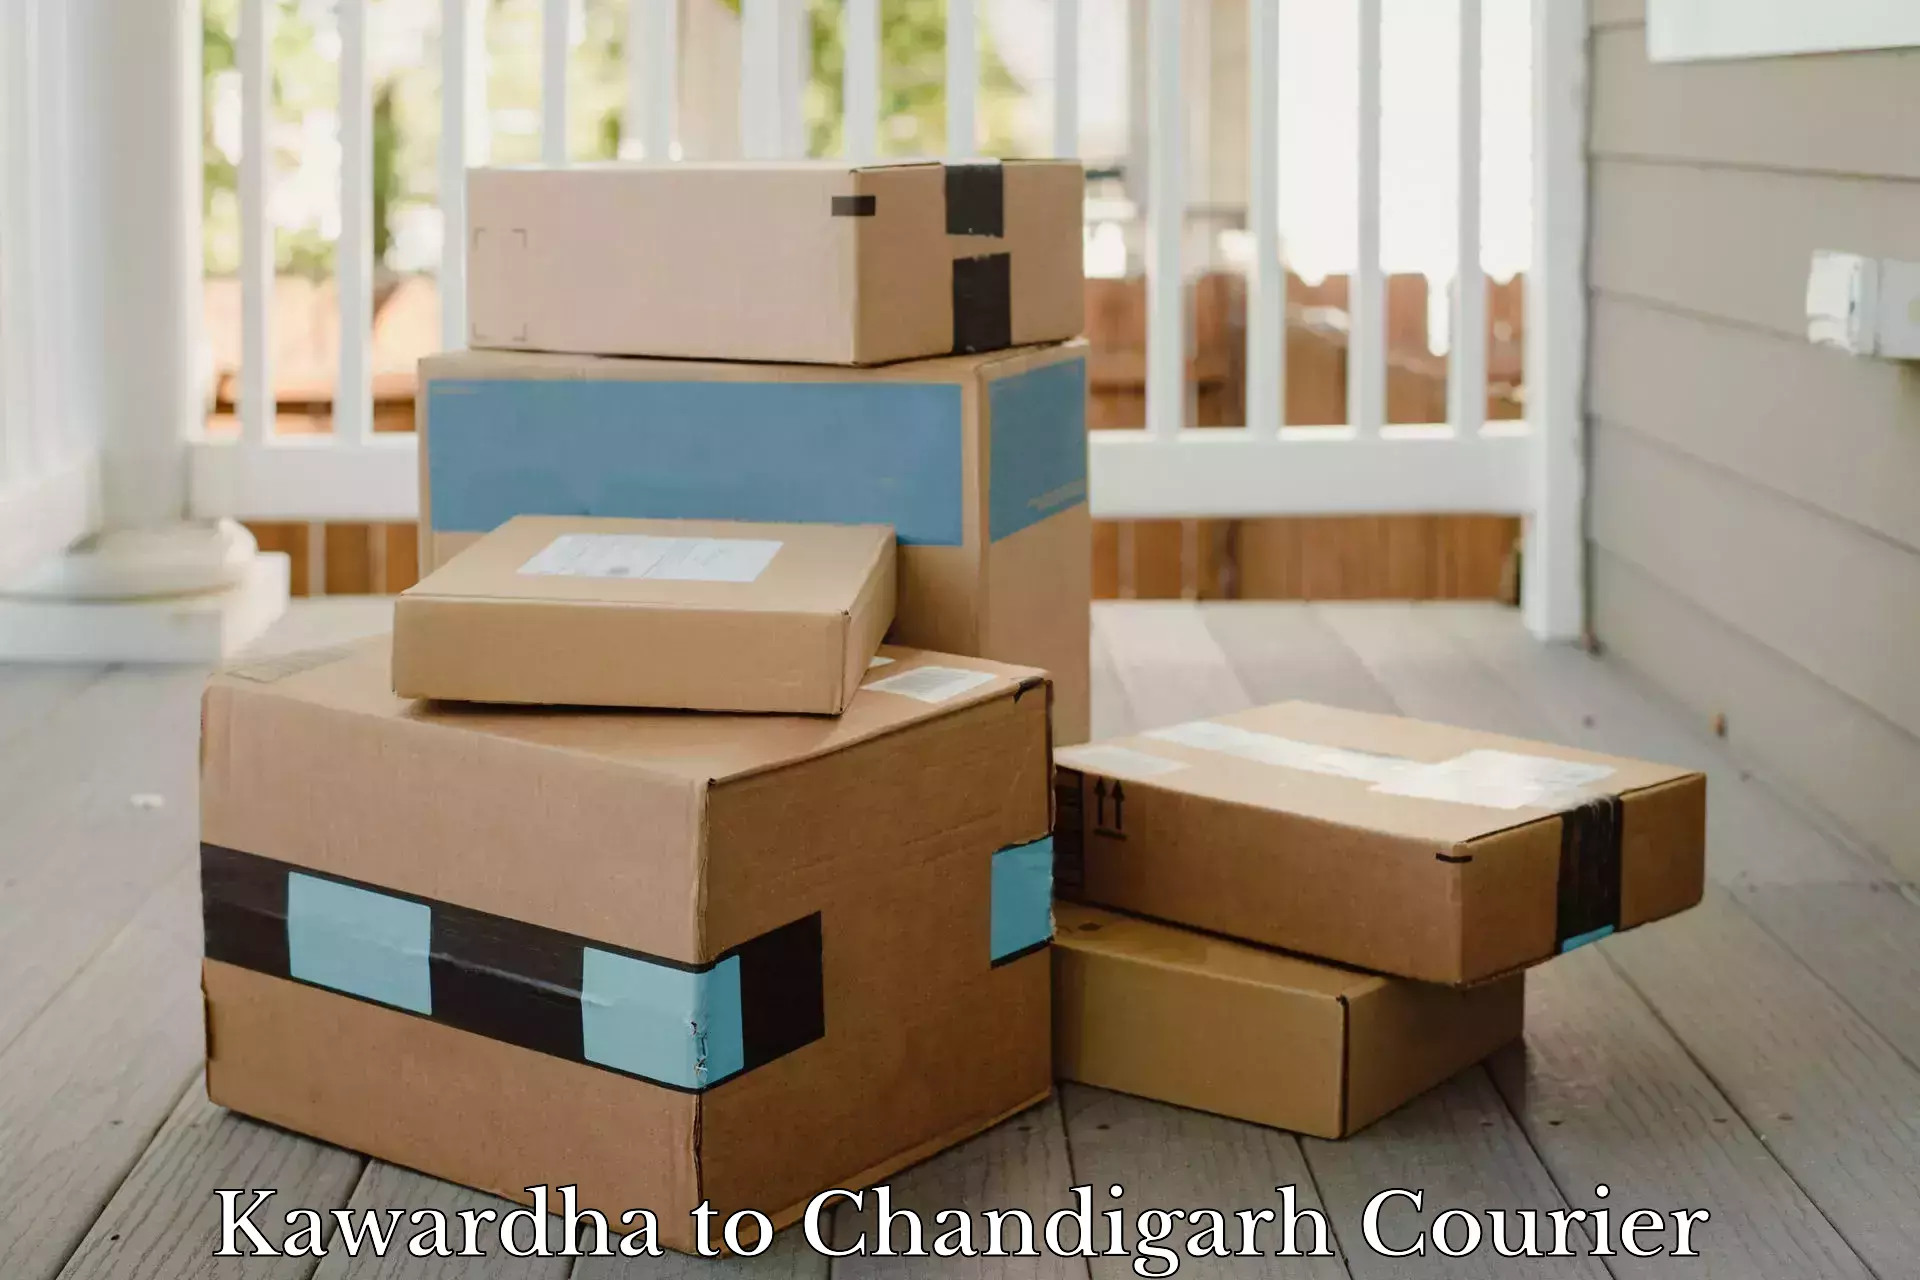 Cargo delivery service Kawardha to Chandigarh